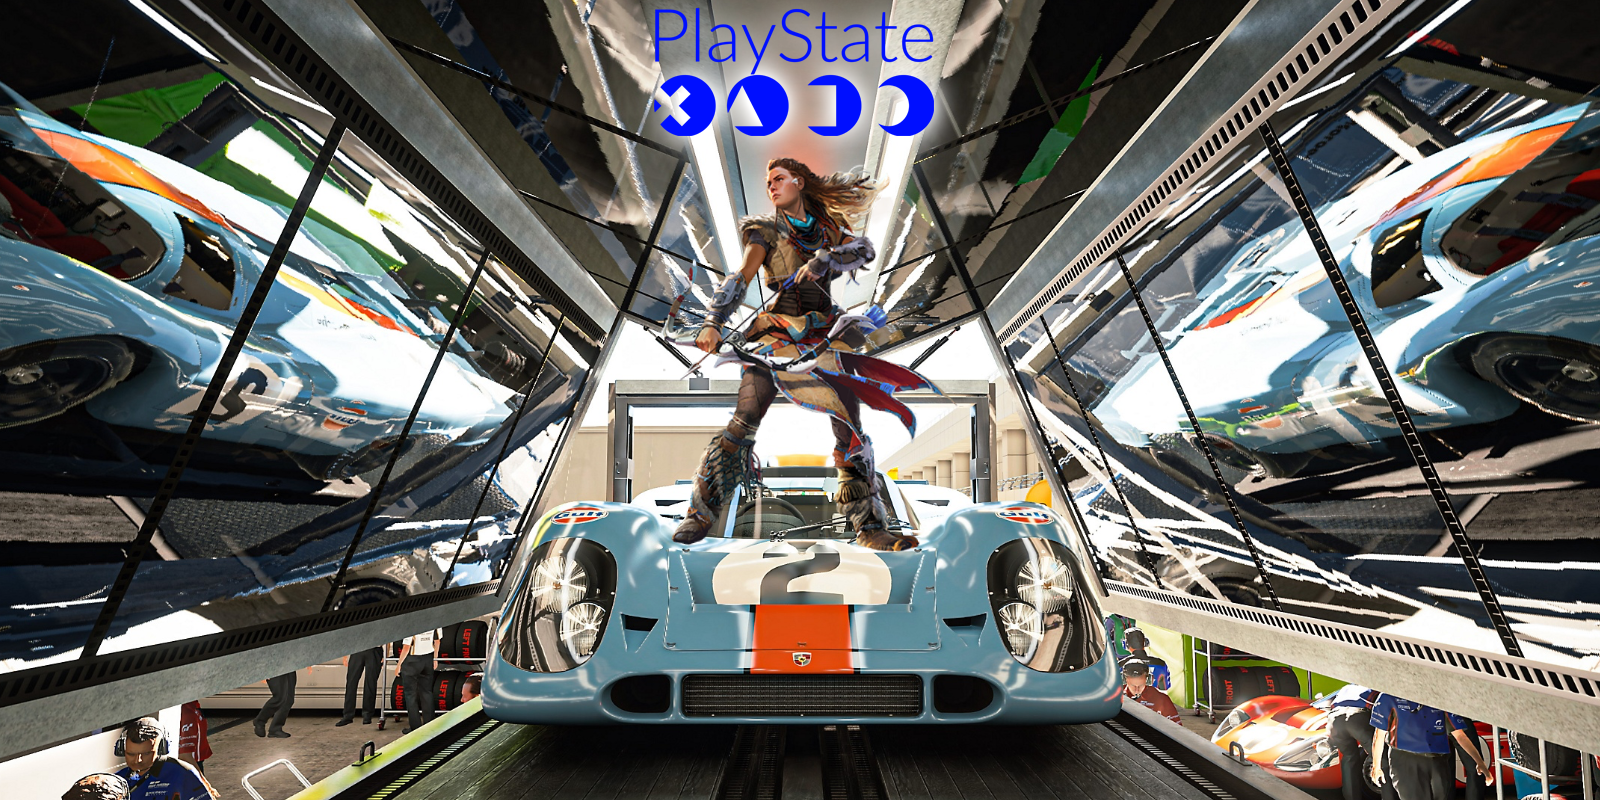 PlayState